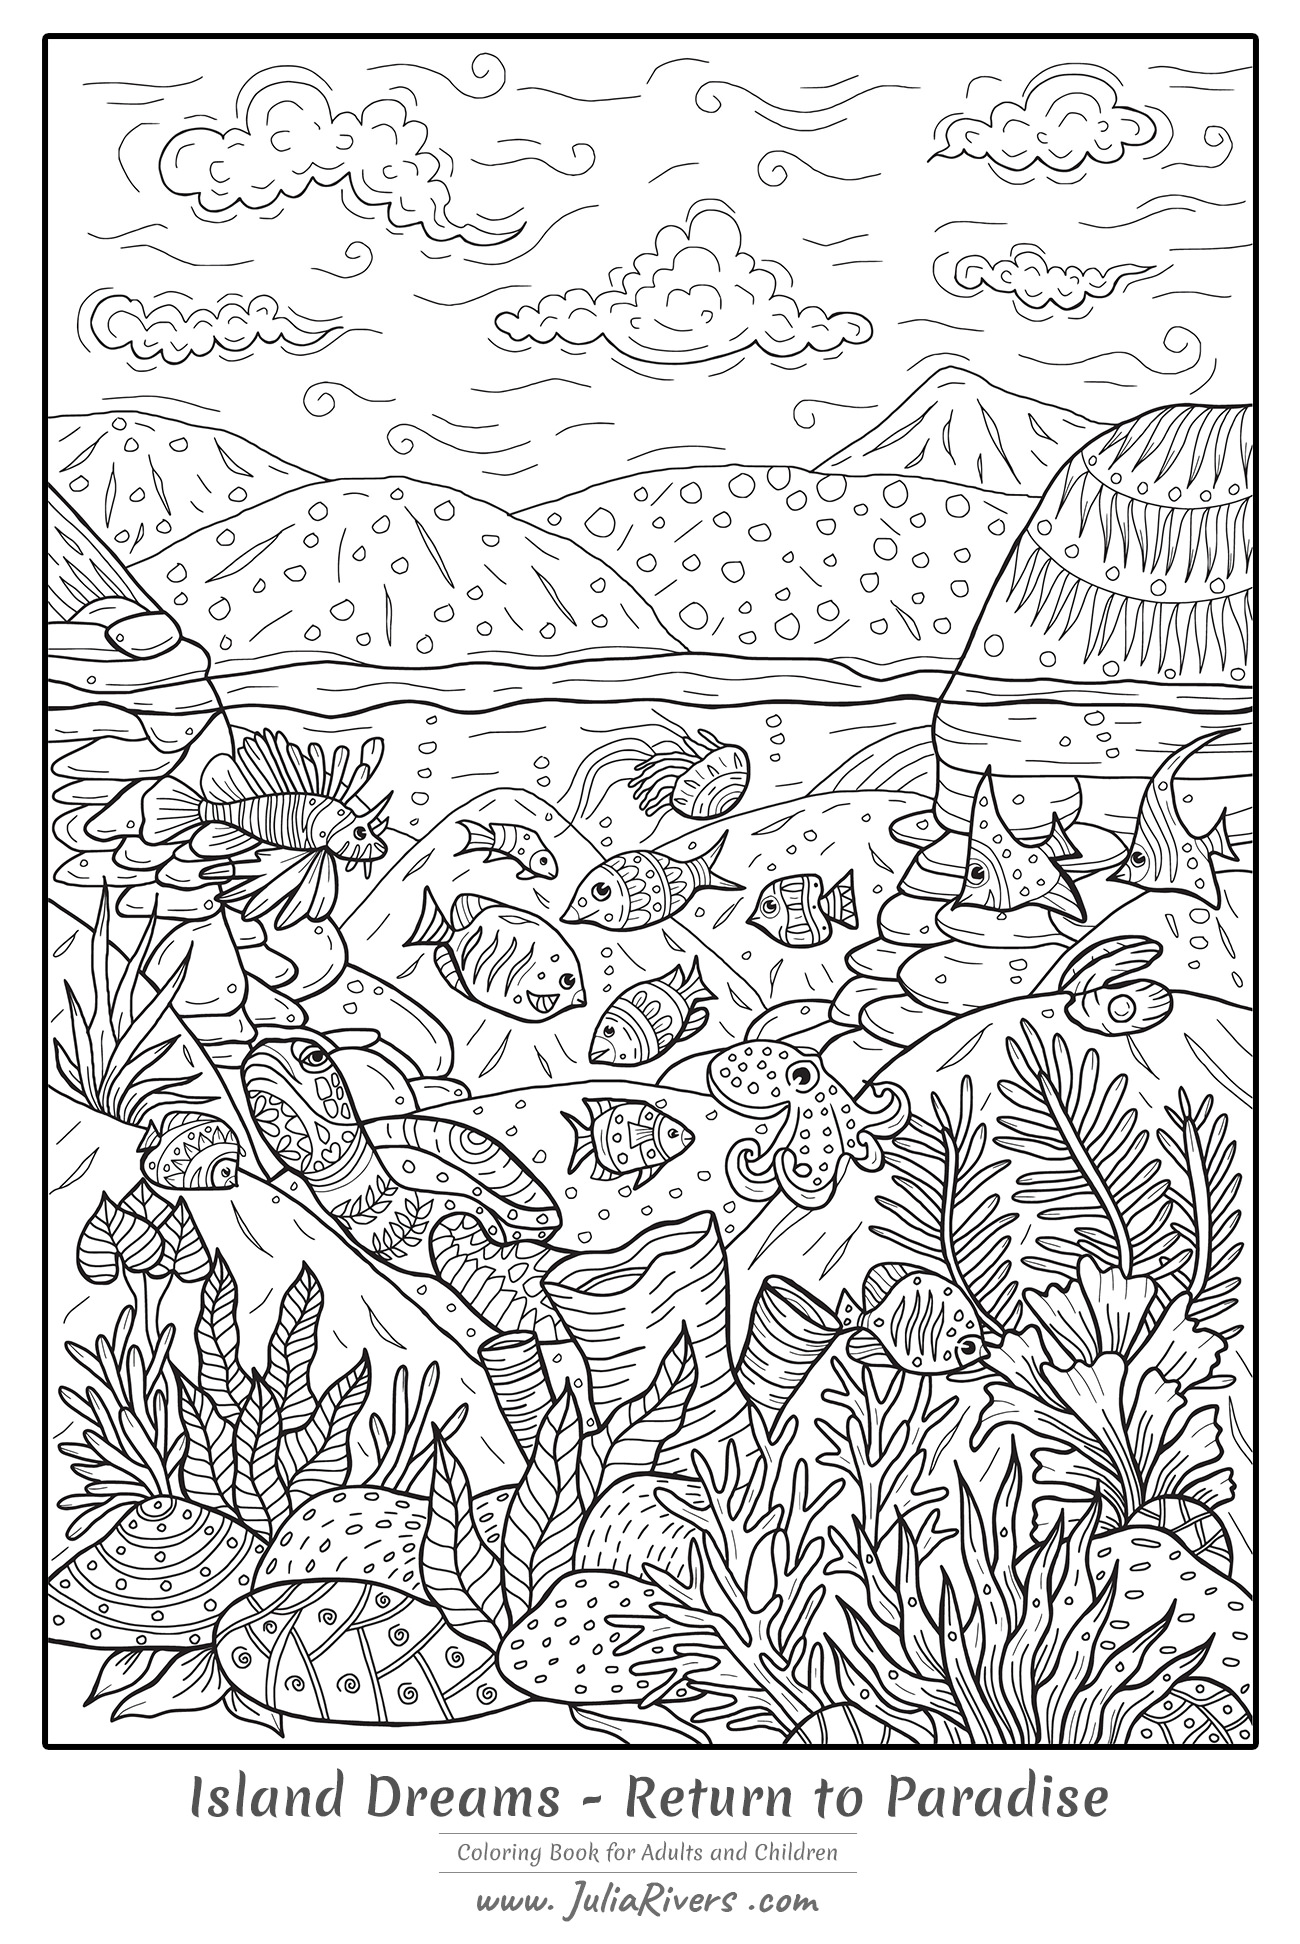 'Island Dreams : Return to Paradise' : Coloring page full of aquatic creatures and plant species ... and a beautiful landscape in background